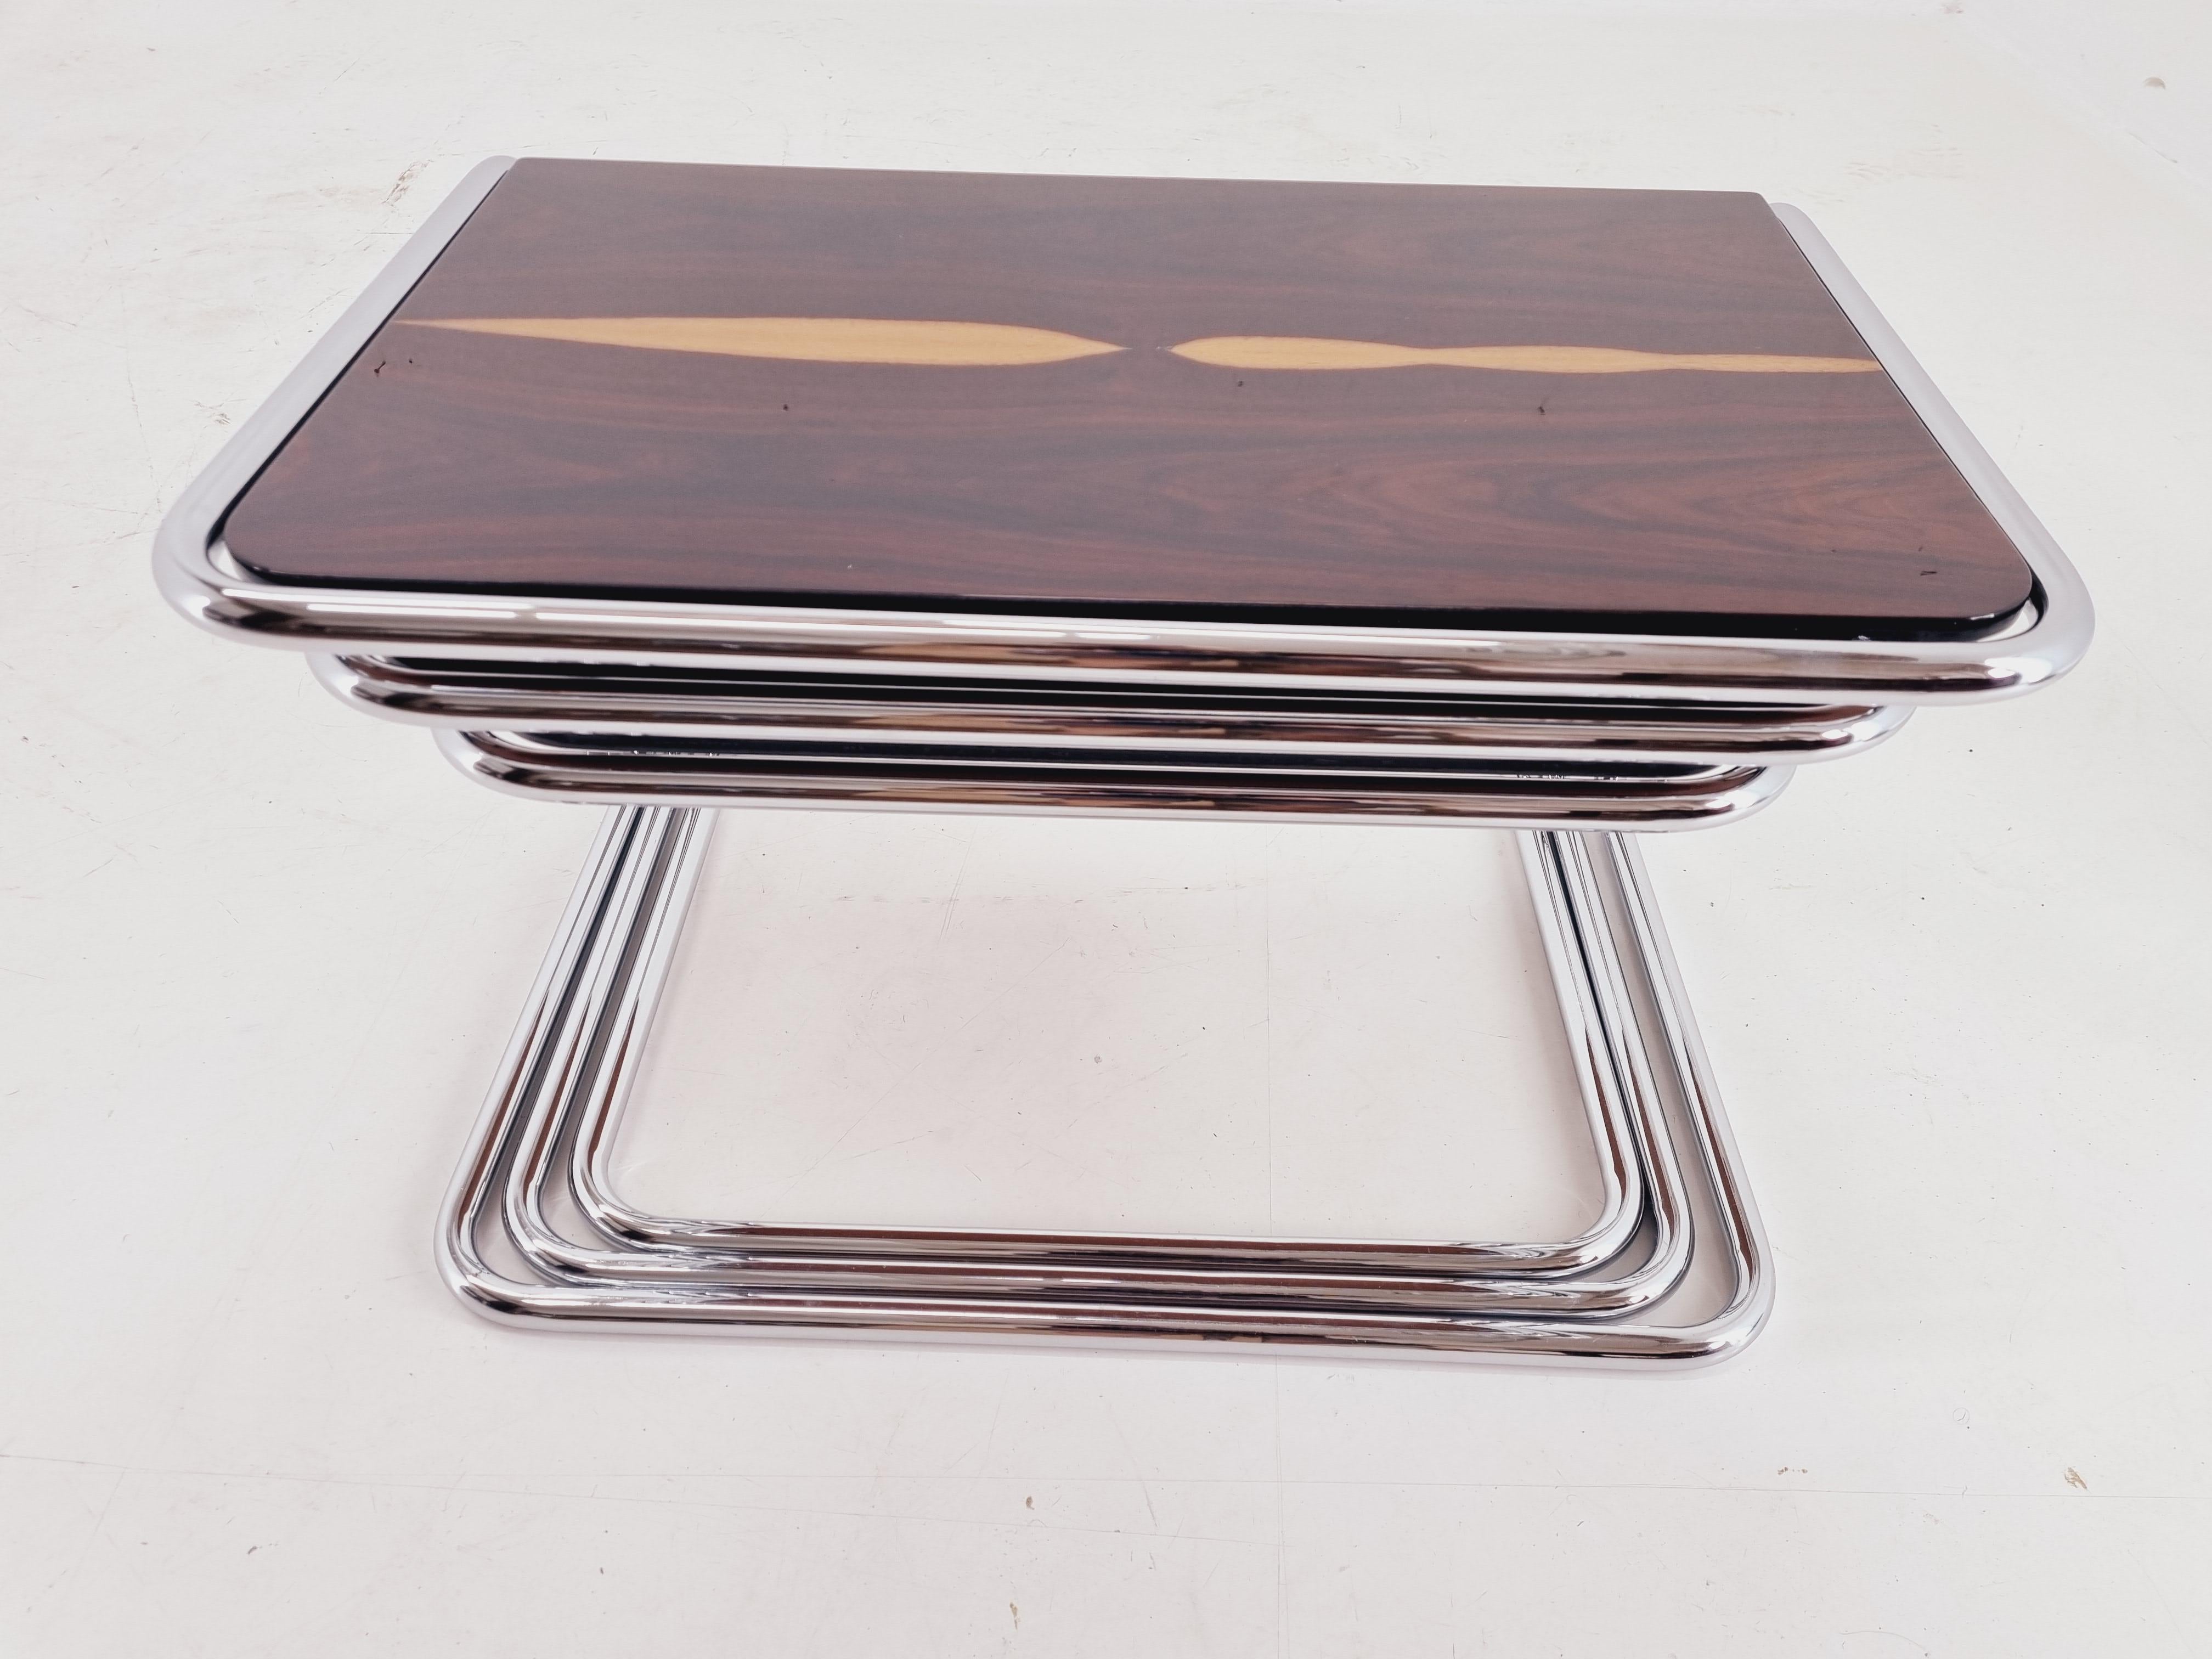 Exclusive Rare Midcentury Nesting Tables, Cocobolo Palisandr and Chrome, 1950s. For Sale 9